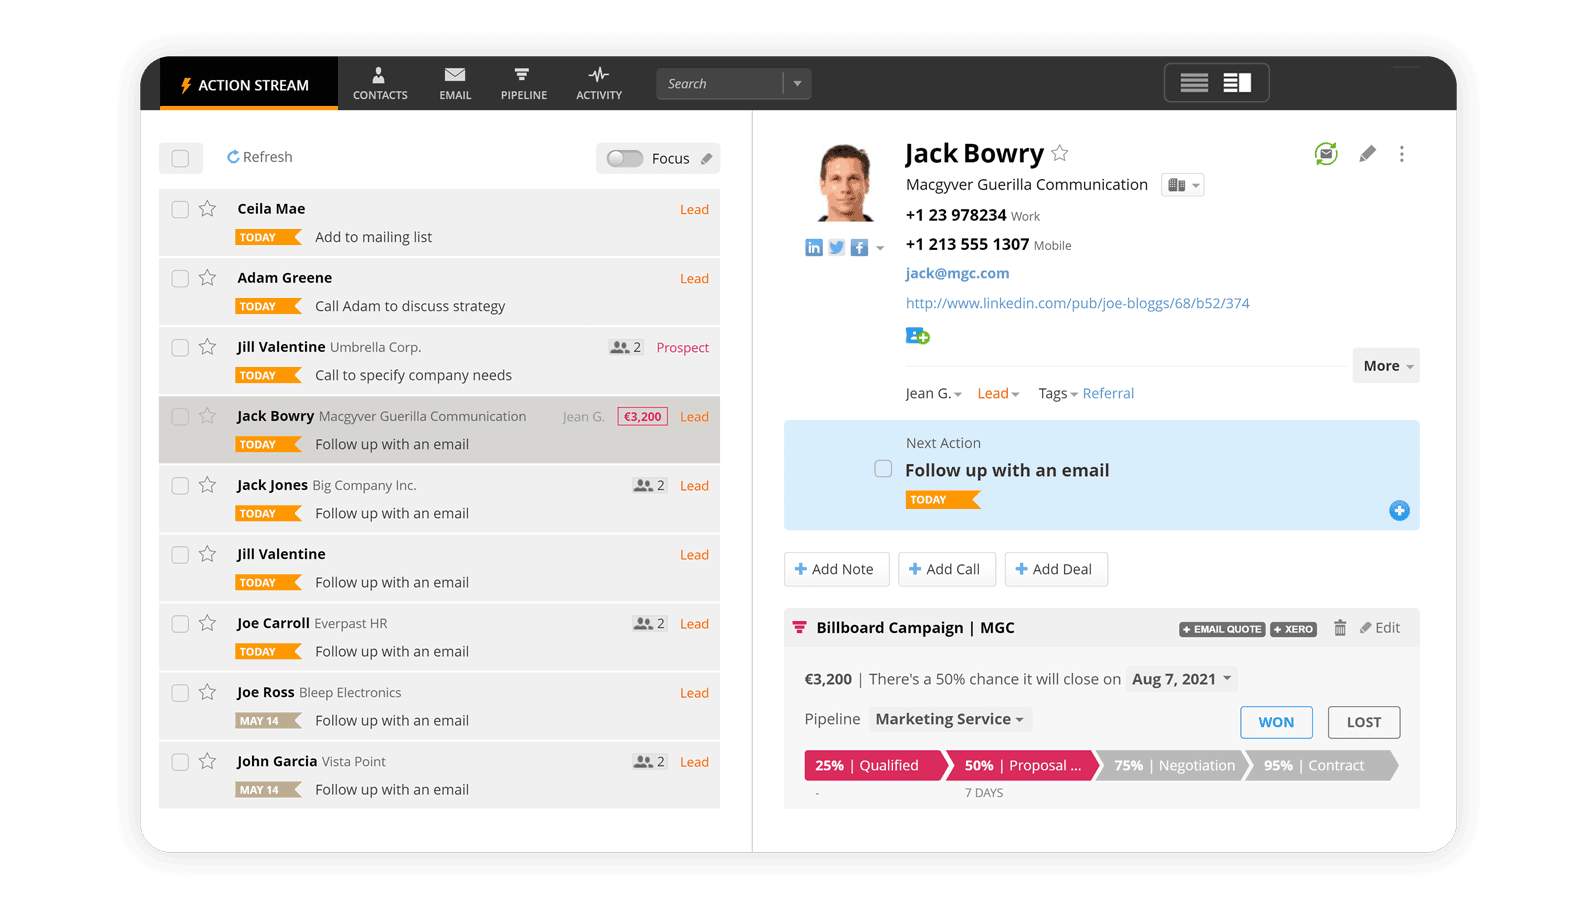 With OnePageCRM, it's easy to track and organize your clients’ information in one place